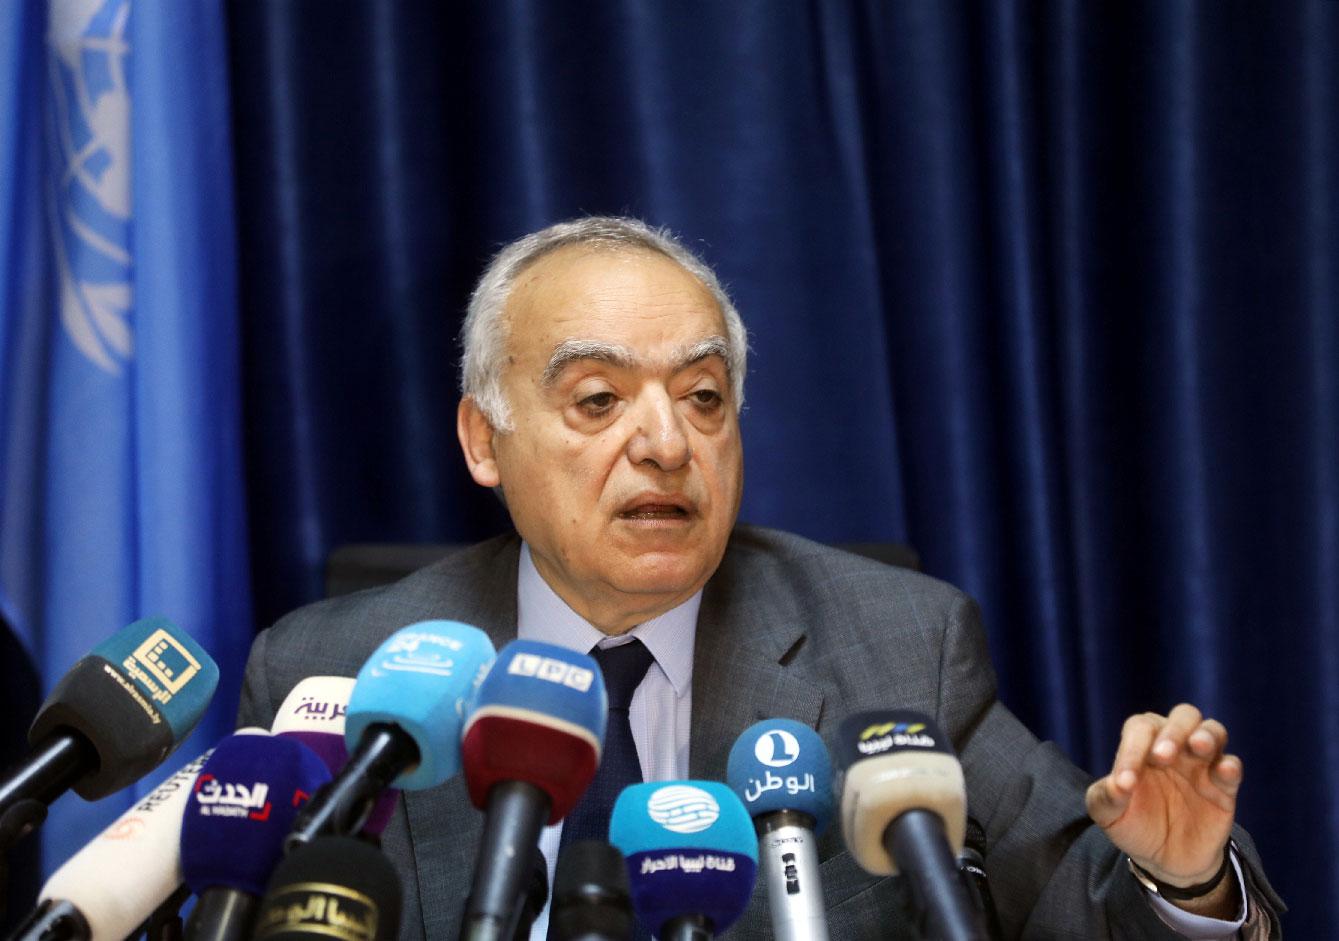 The UN Envoy for Libya, Ghassan Salame, speaks during a news conference in Tripoli, Libya March 20, 2019.